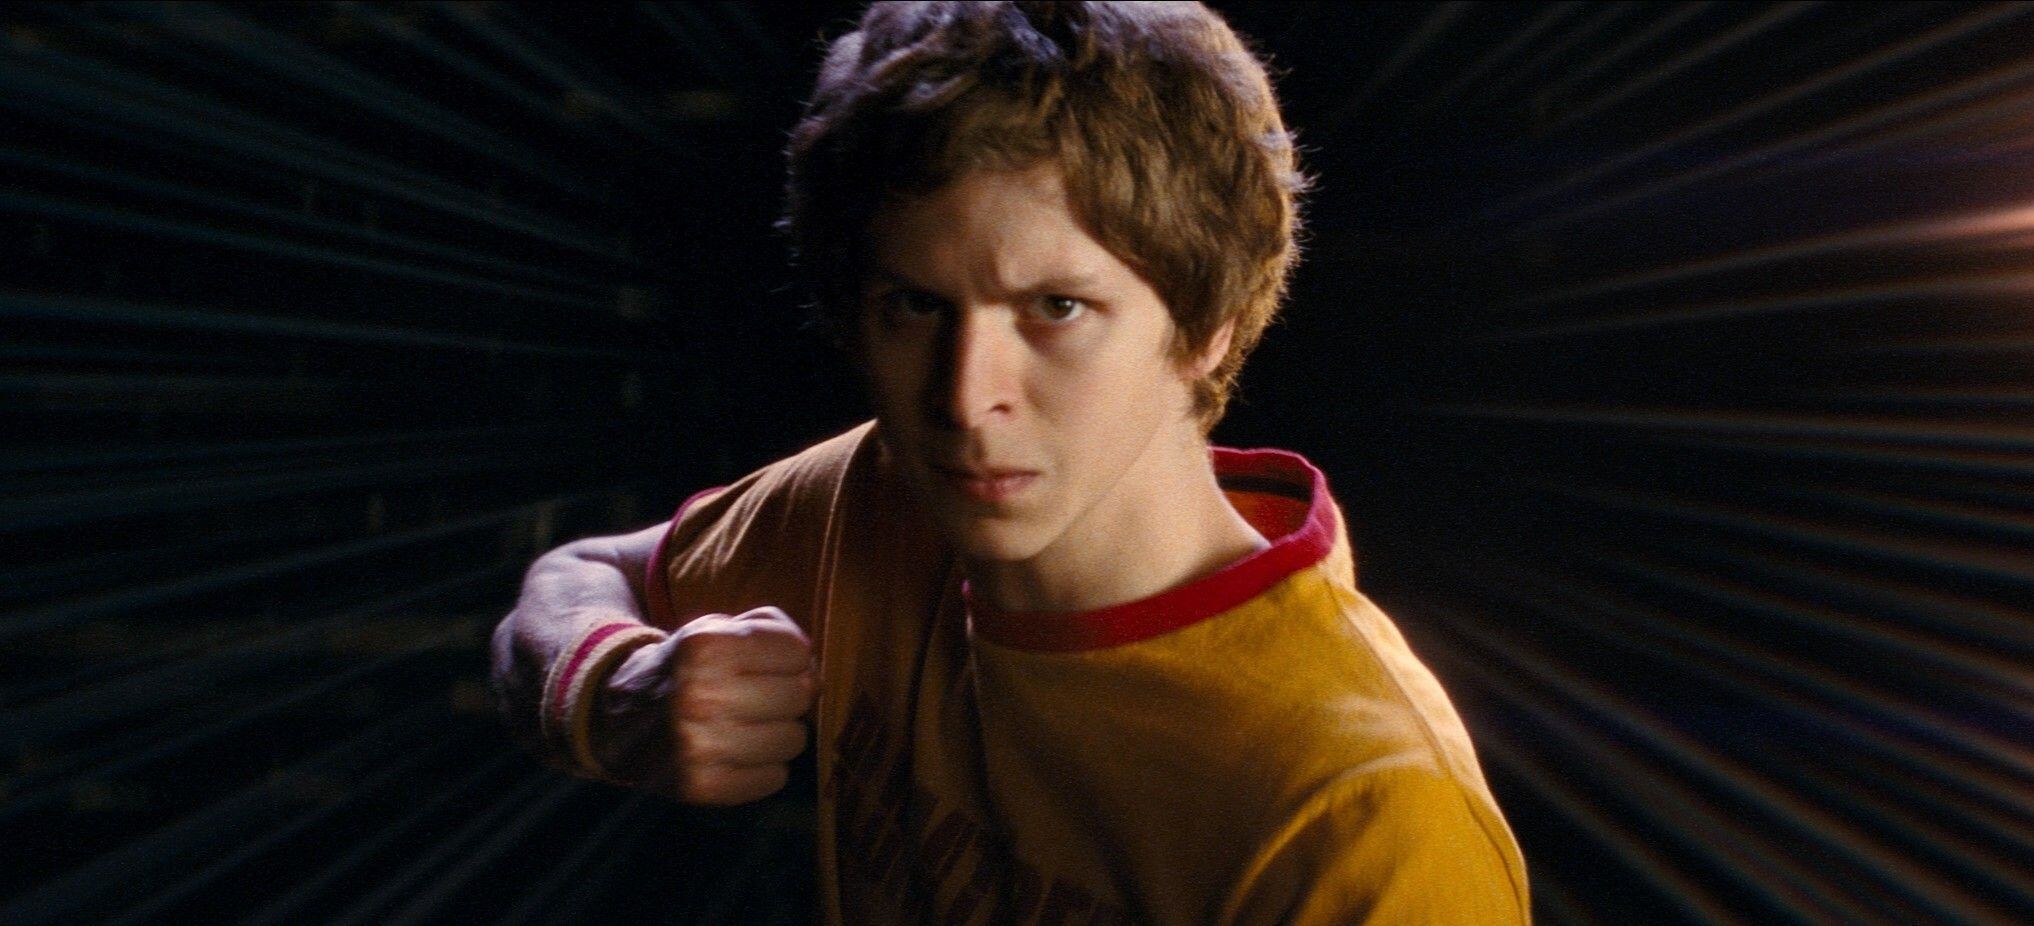 Michael Cera puts on an angry face and gears up for a fist fight